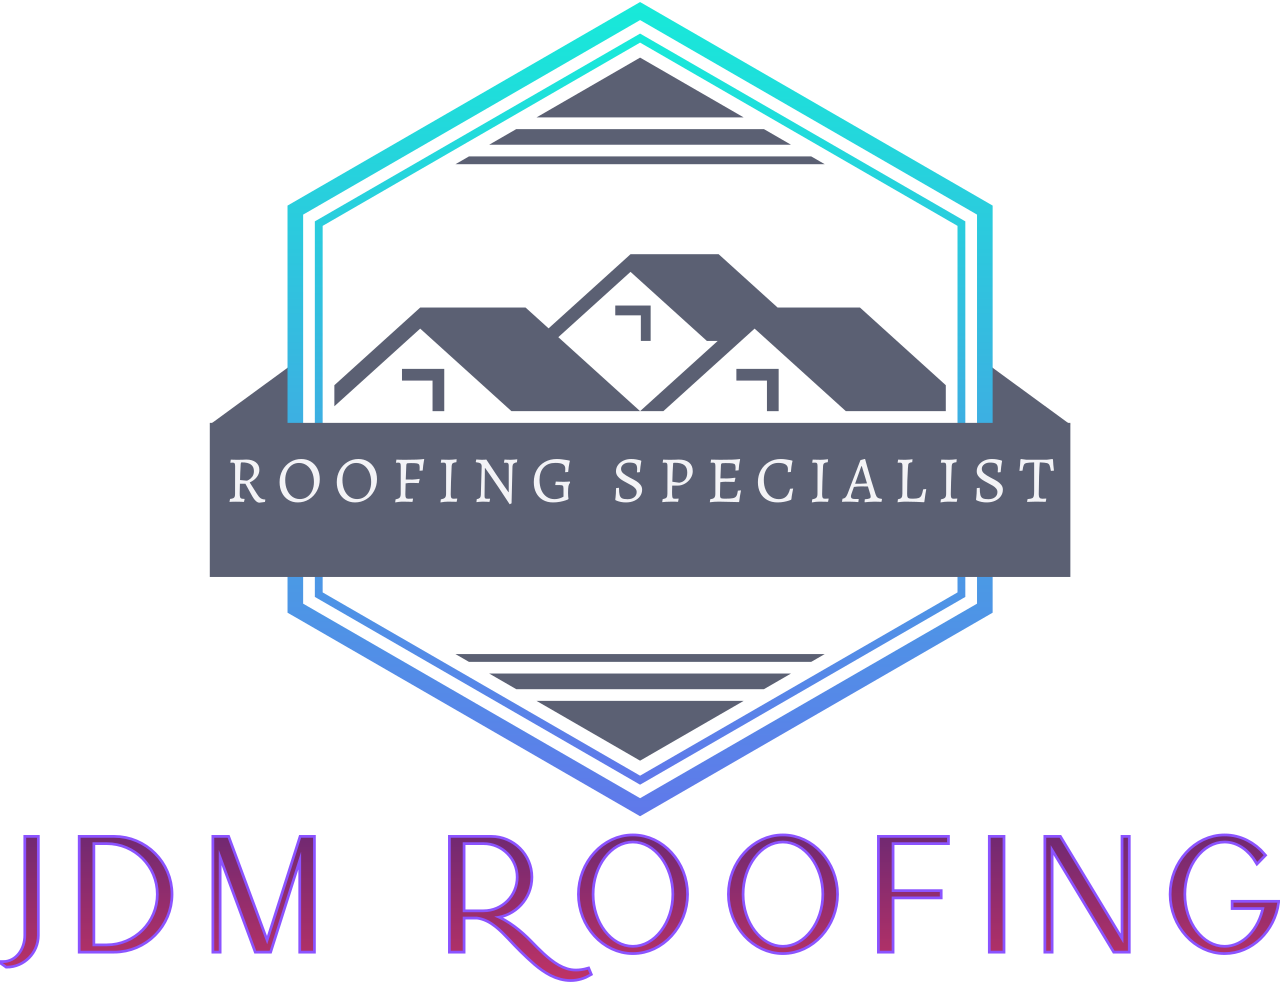 JDM ROOFING's web page